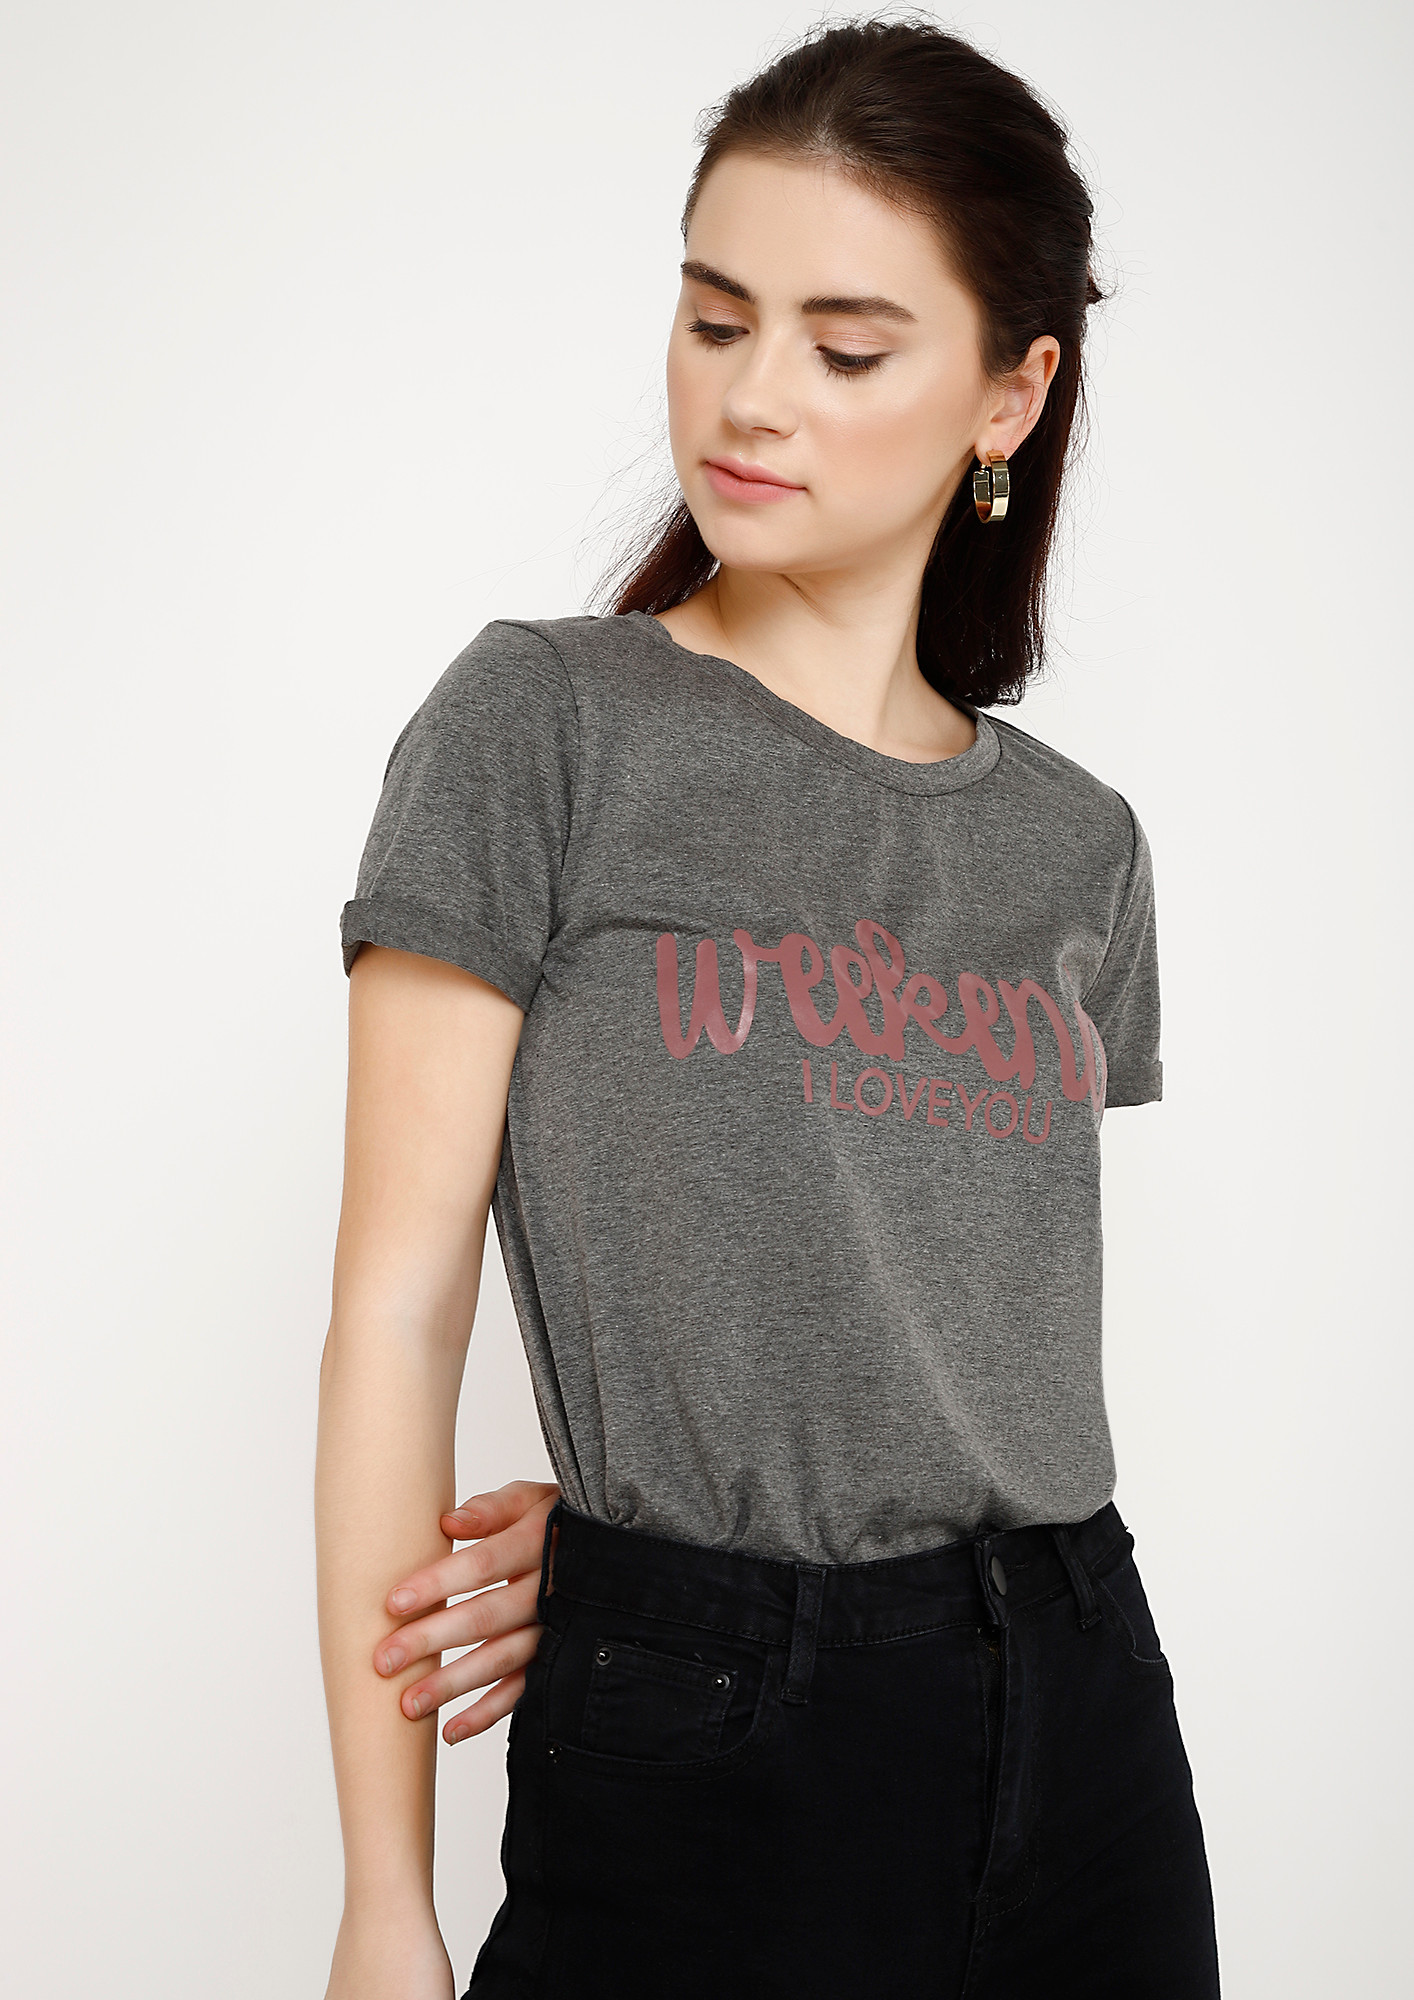 THE WEEKEND LOVER GREY T-SHIRT